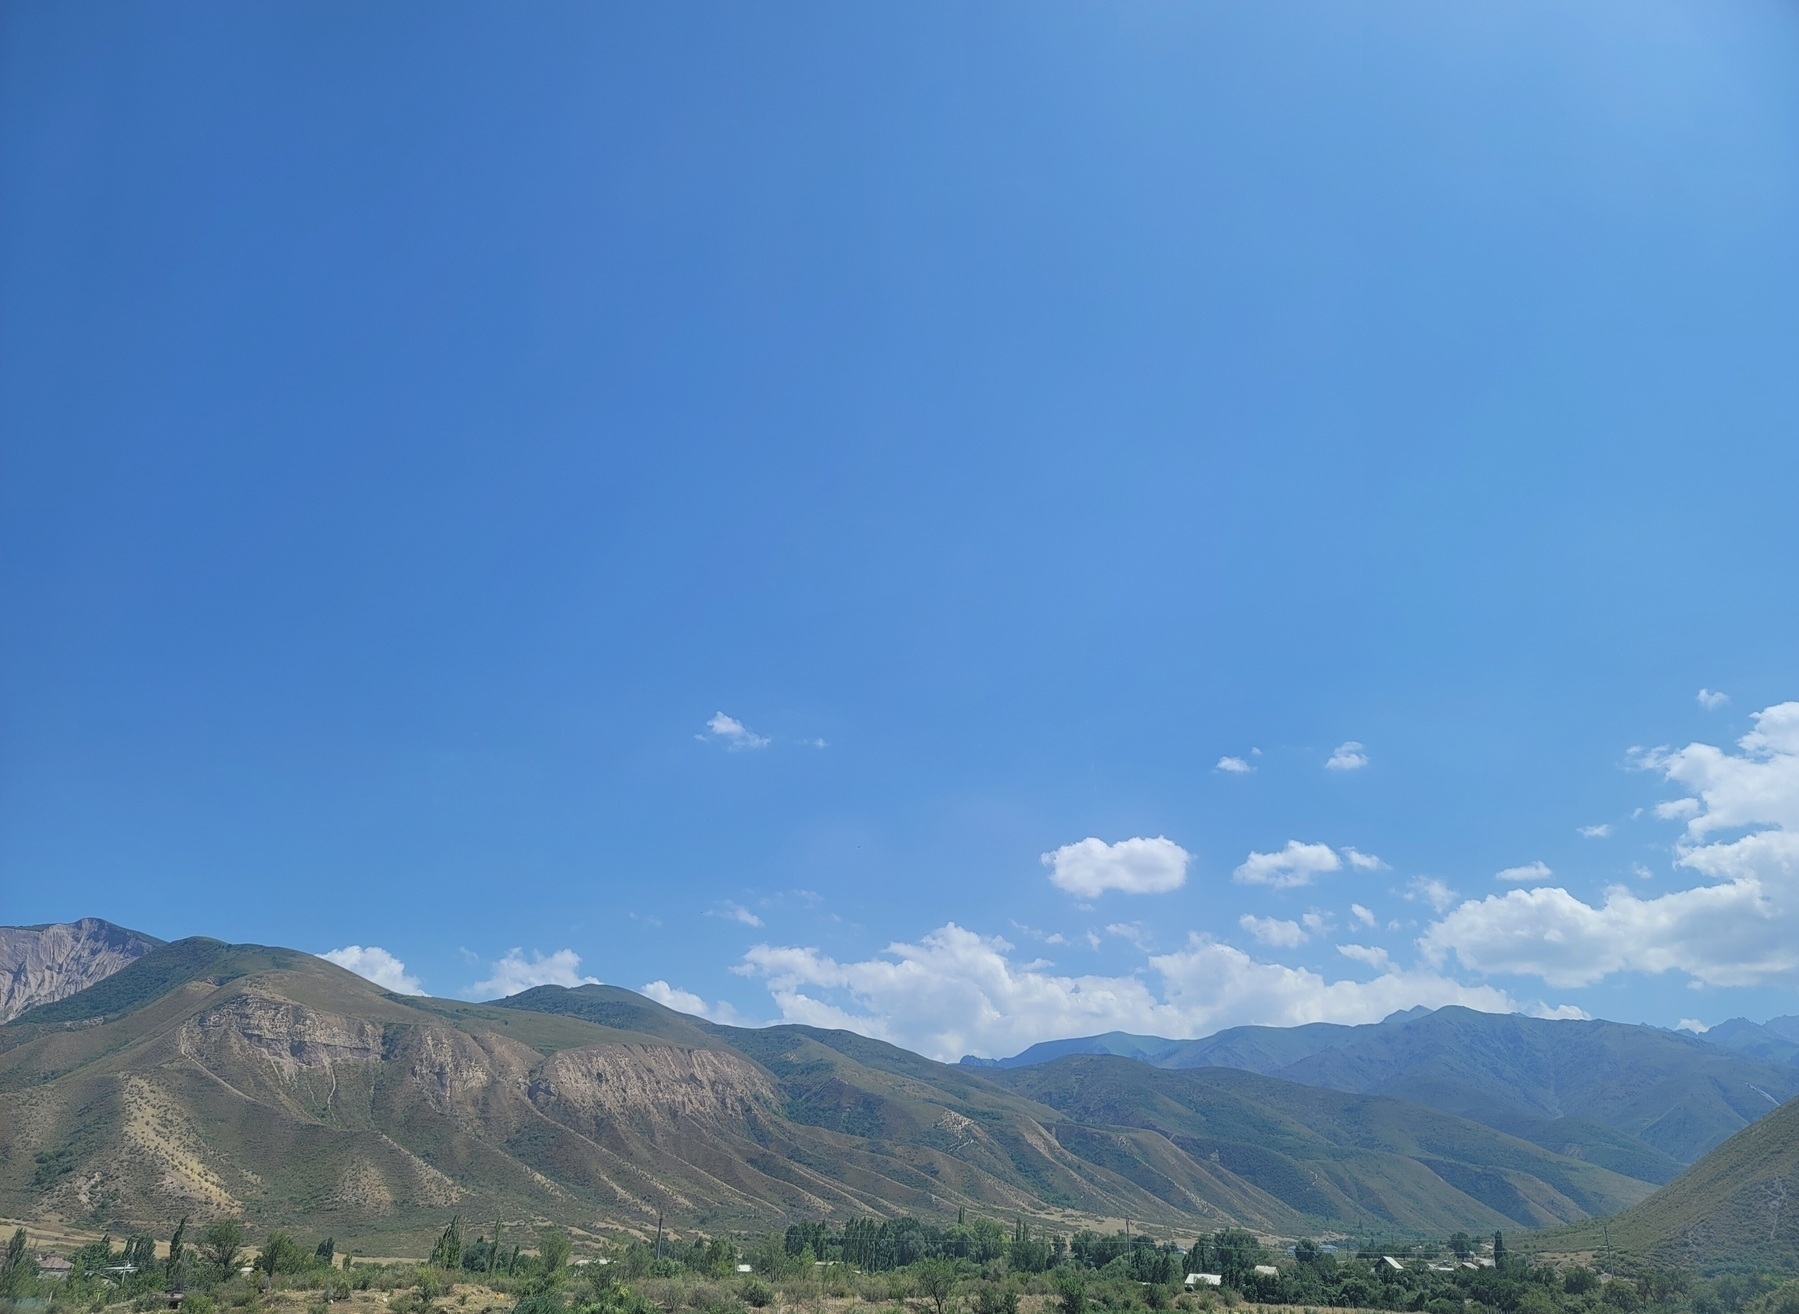 green and brown mountain valley under a blue sky with some white clouds